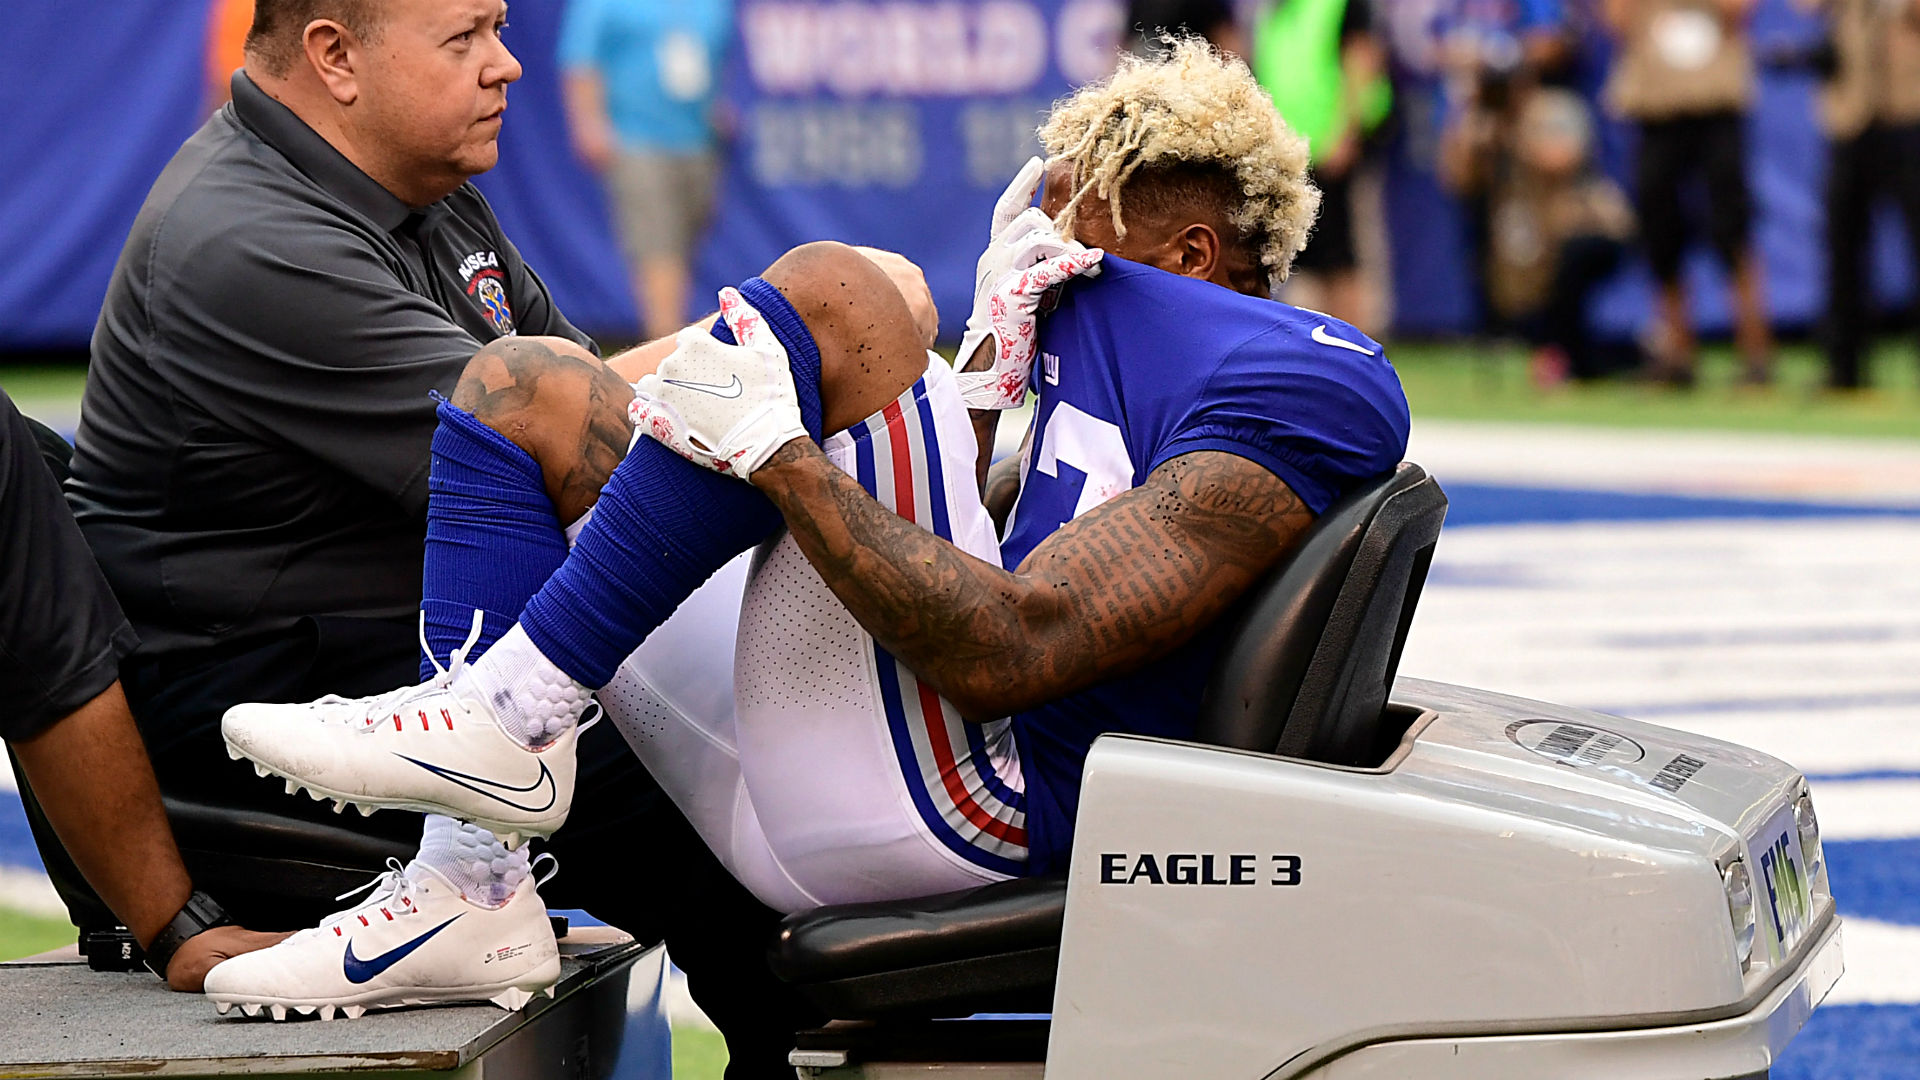 Giants injury updates: Odell Beckham Jr. will have potentially season-ending ankle surgery